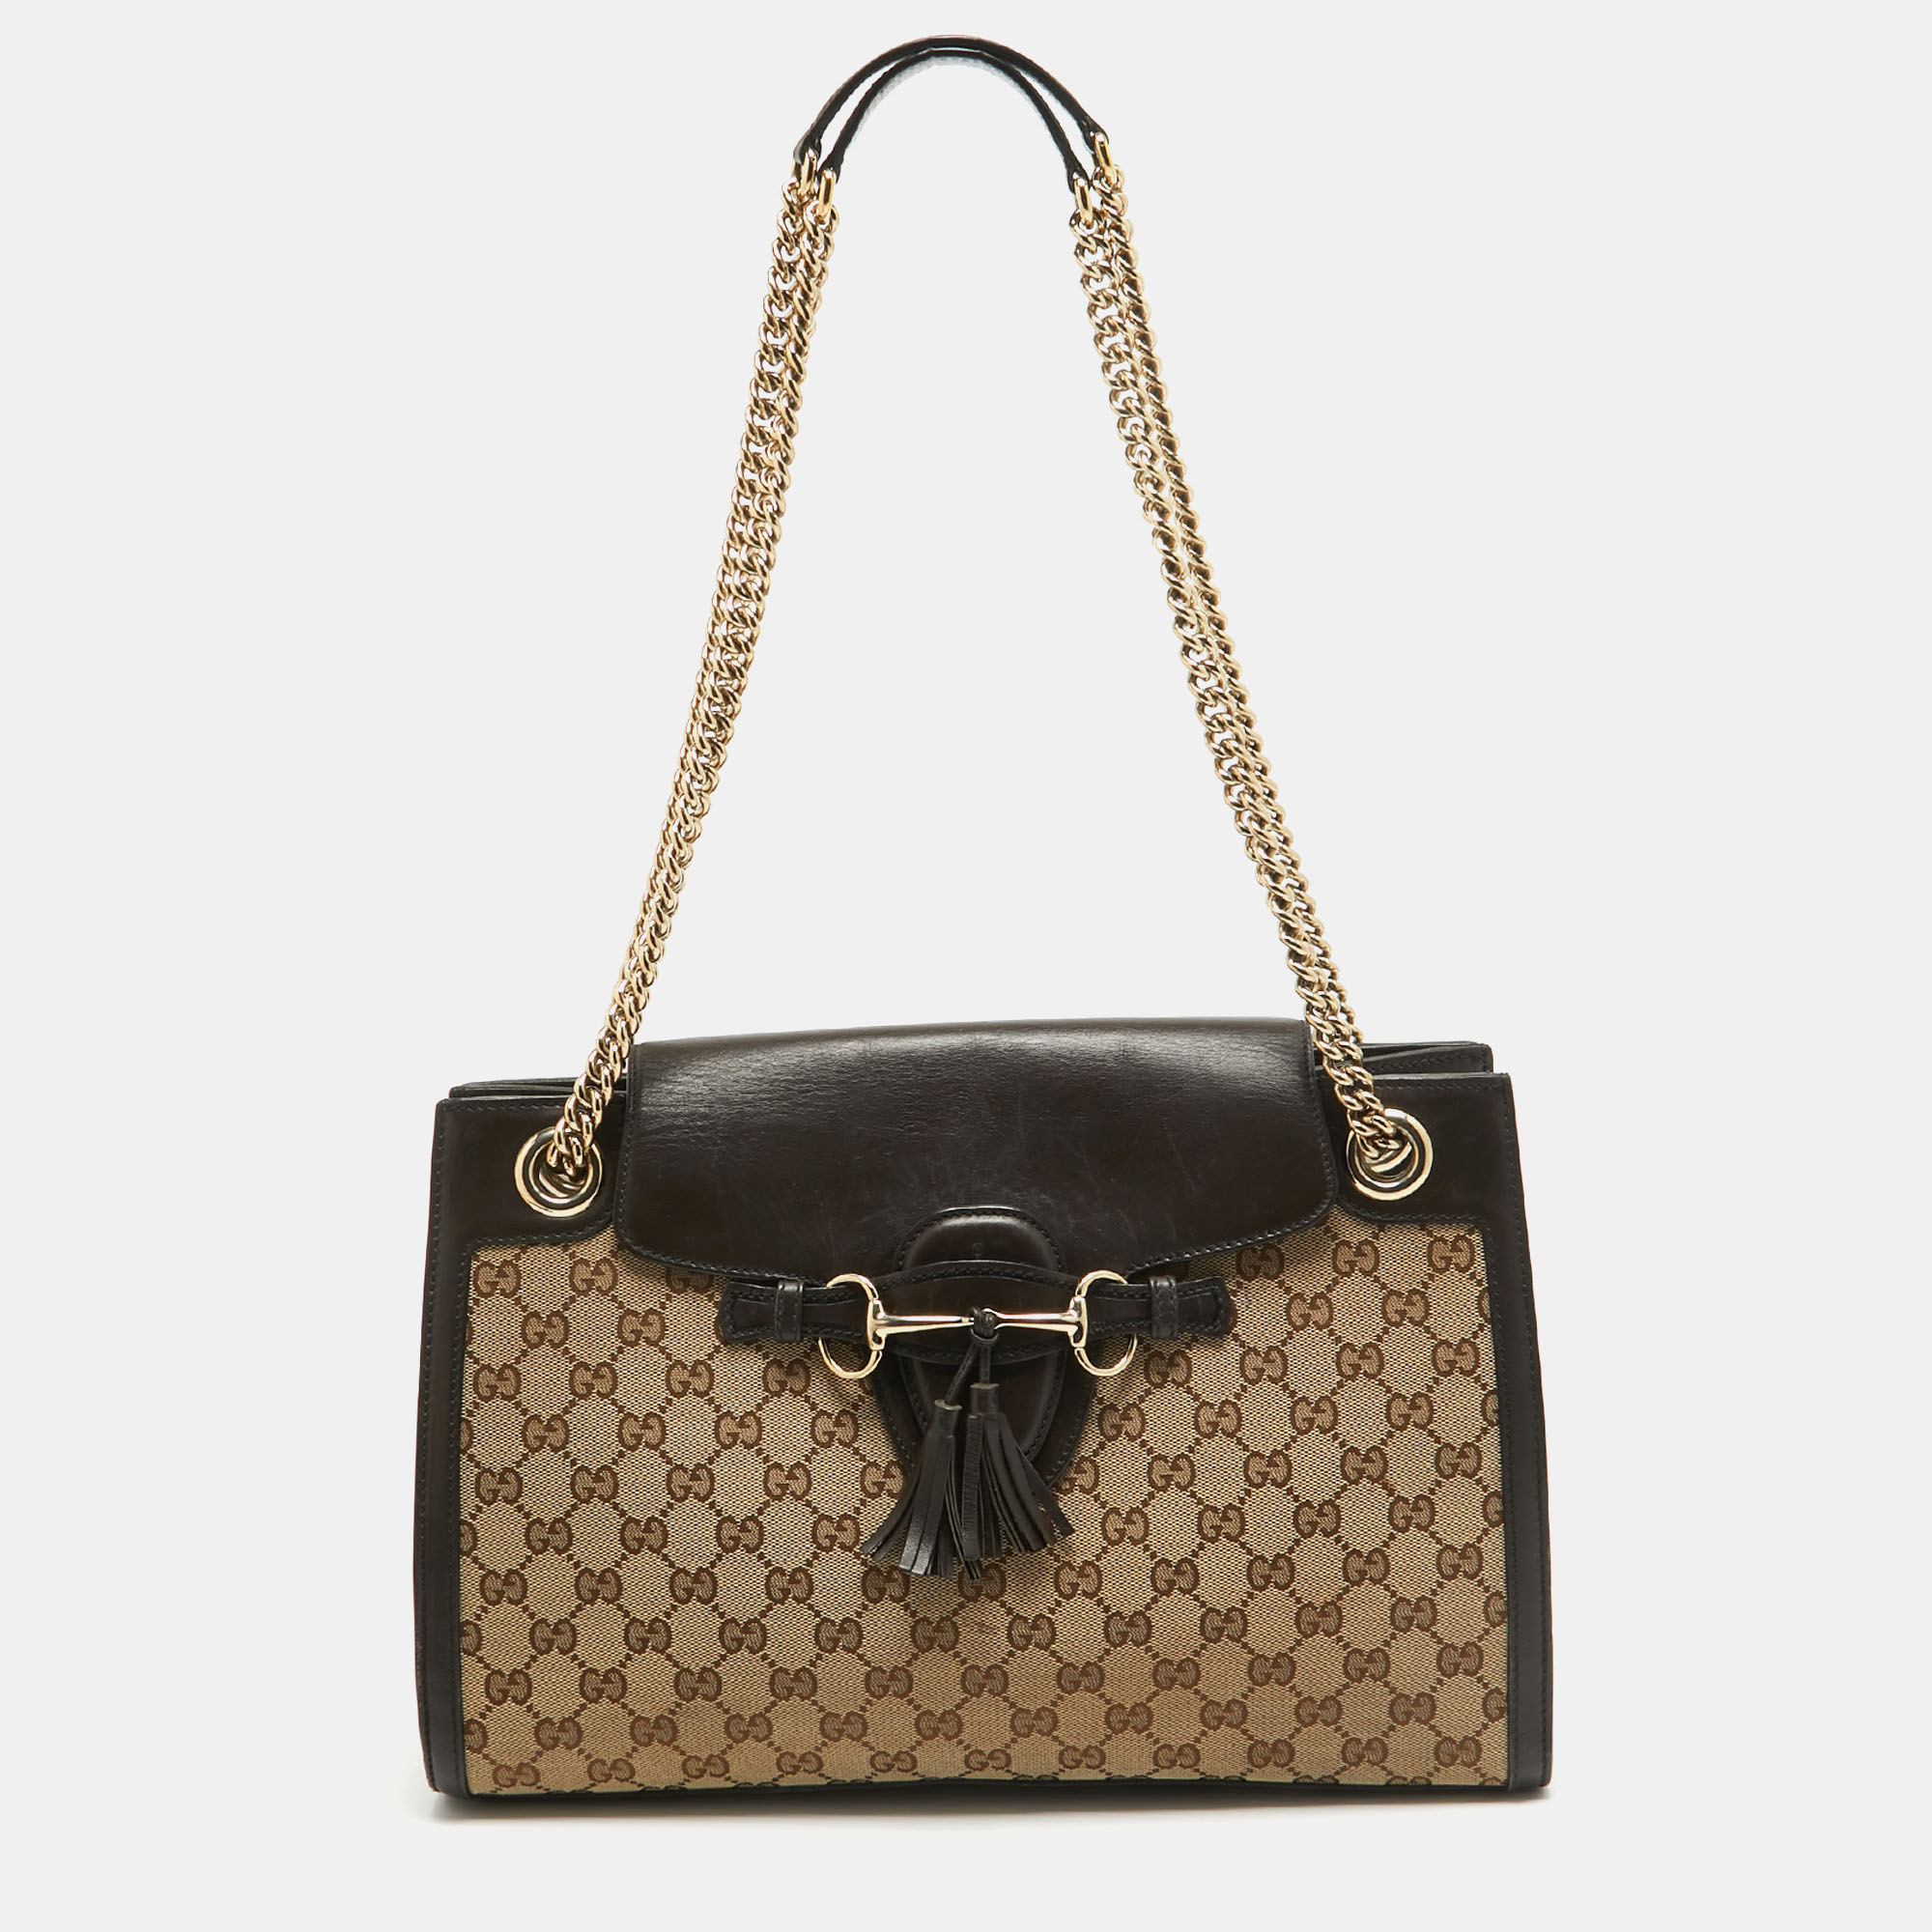 Guccis handbags are not only well crafted but they are also coveted because of their high appeal. This Emily Chain shoulder bag like all of Guccis creations is fabulous and closet worthy. It has been crafted from GG canvas and leather and styled with a flap that leads way to a canvas interior. The bag is covered by a lovely beige hue and held by chain handles.